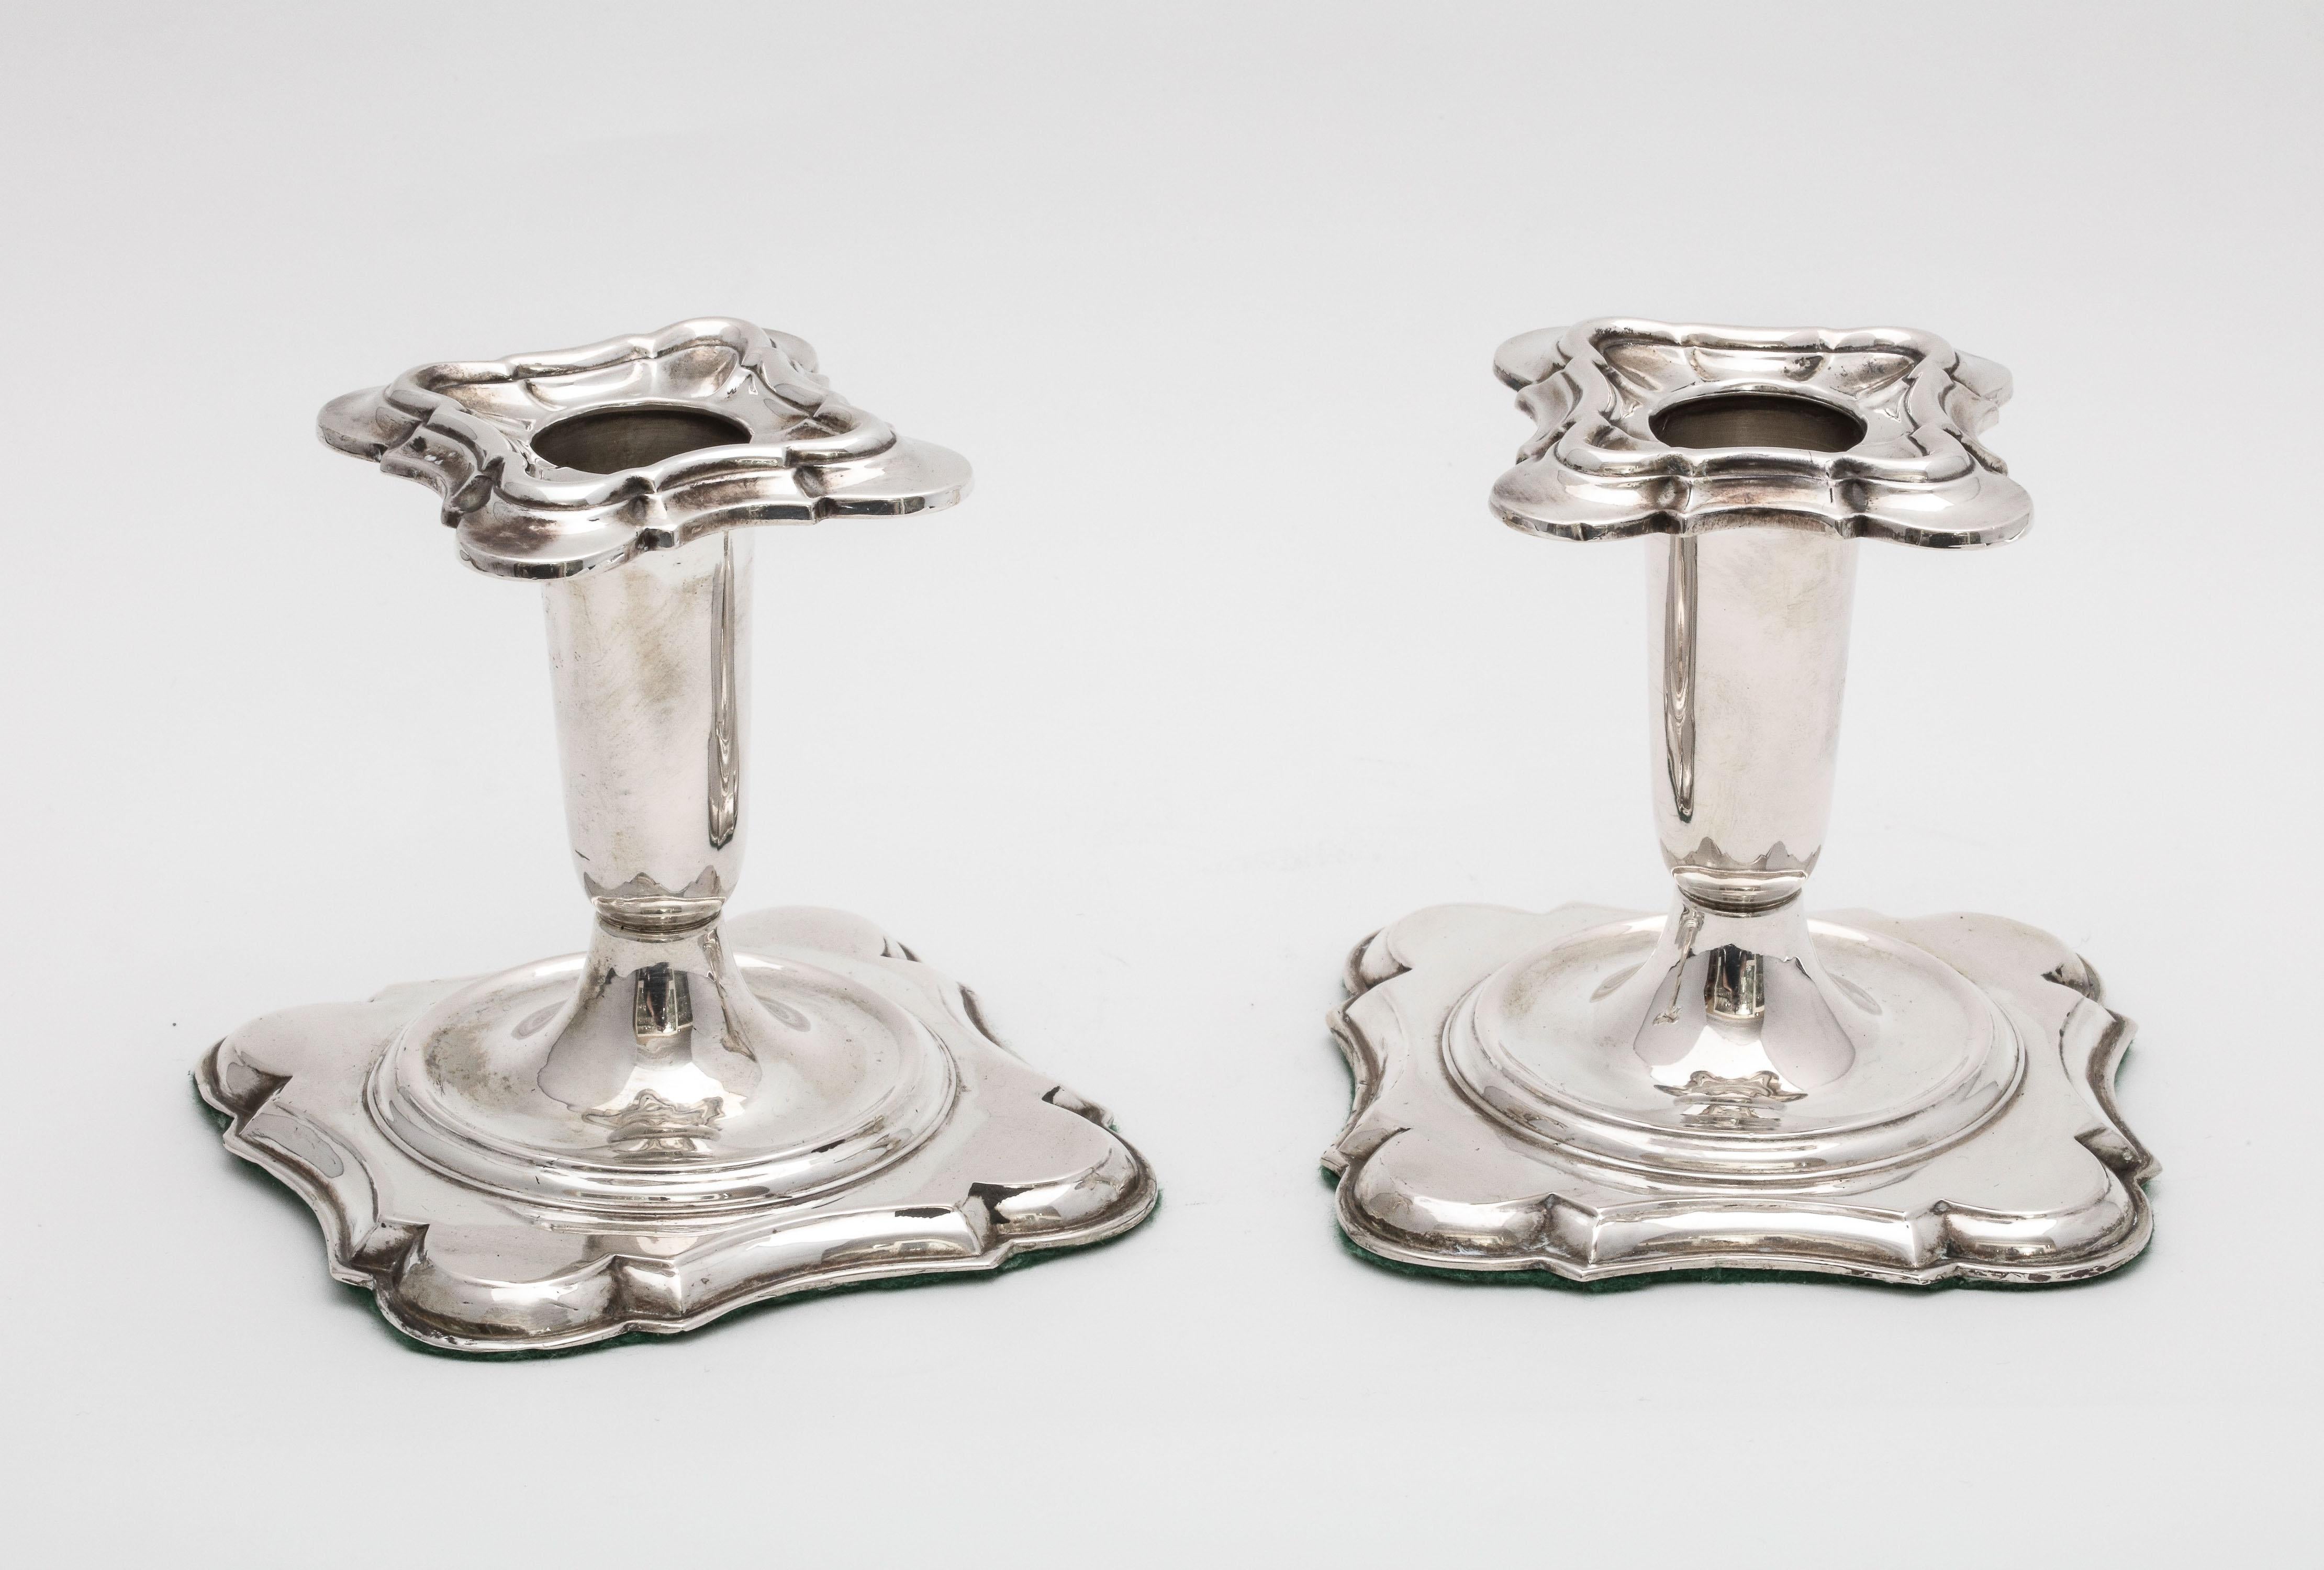 Pair of Continental Silver '.835' Norwegian Candlesticks by Theodor Olsens In Good Condition For Sale In New York, NY